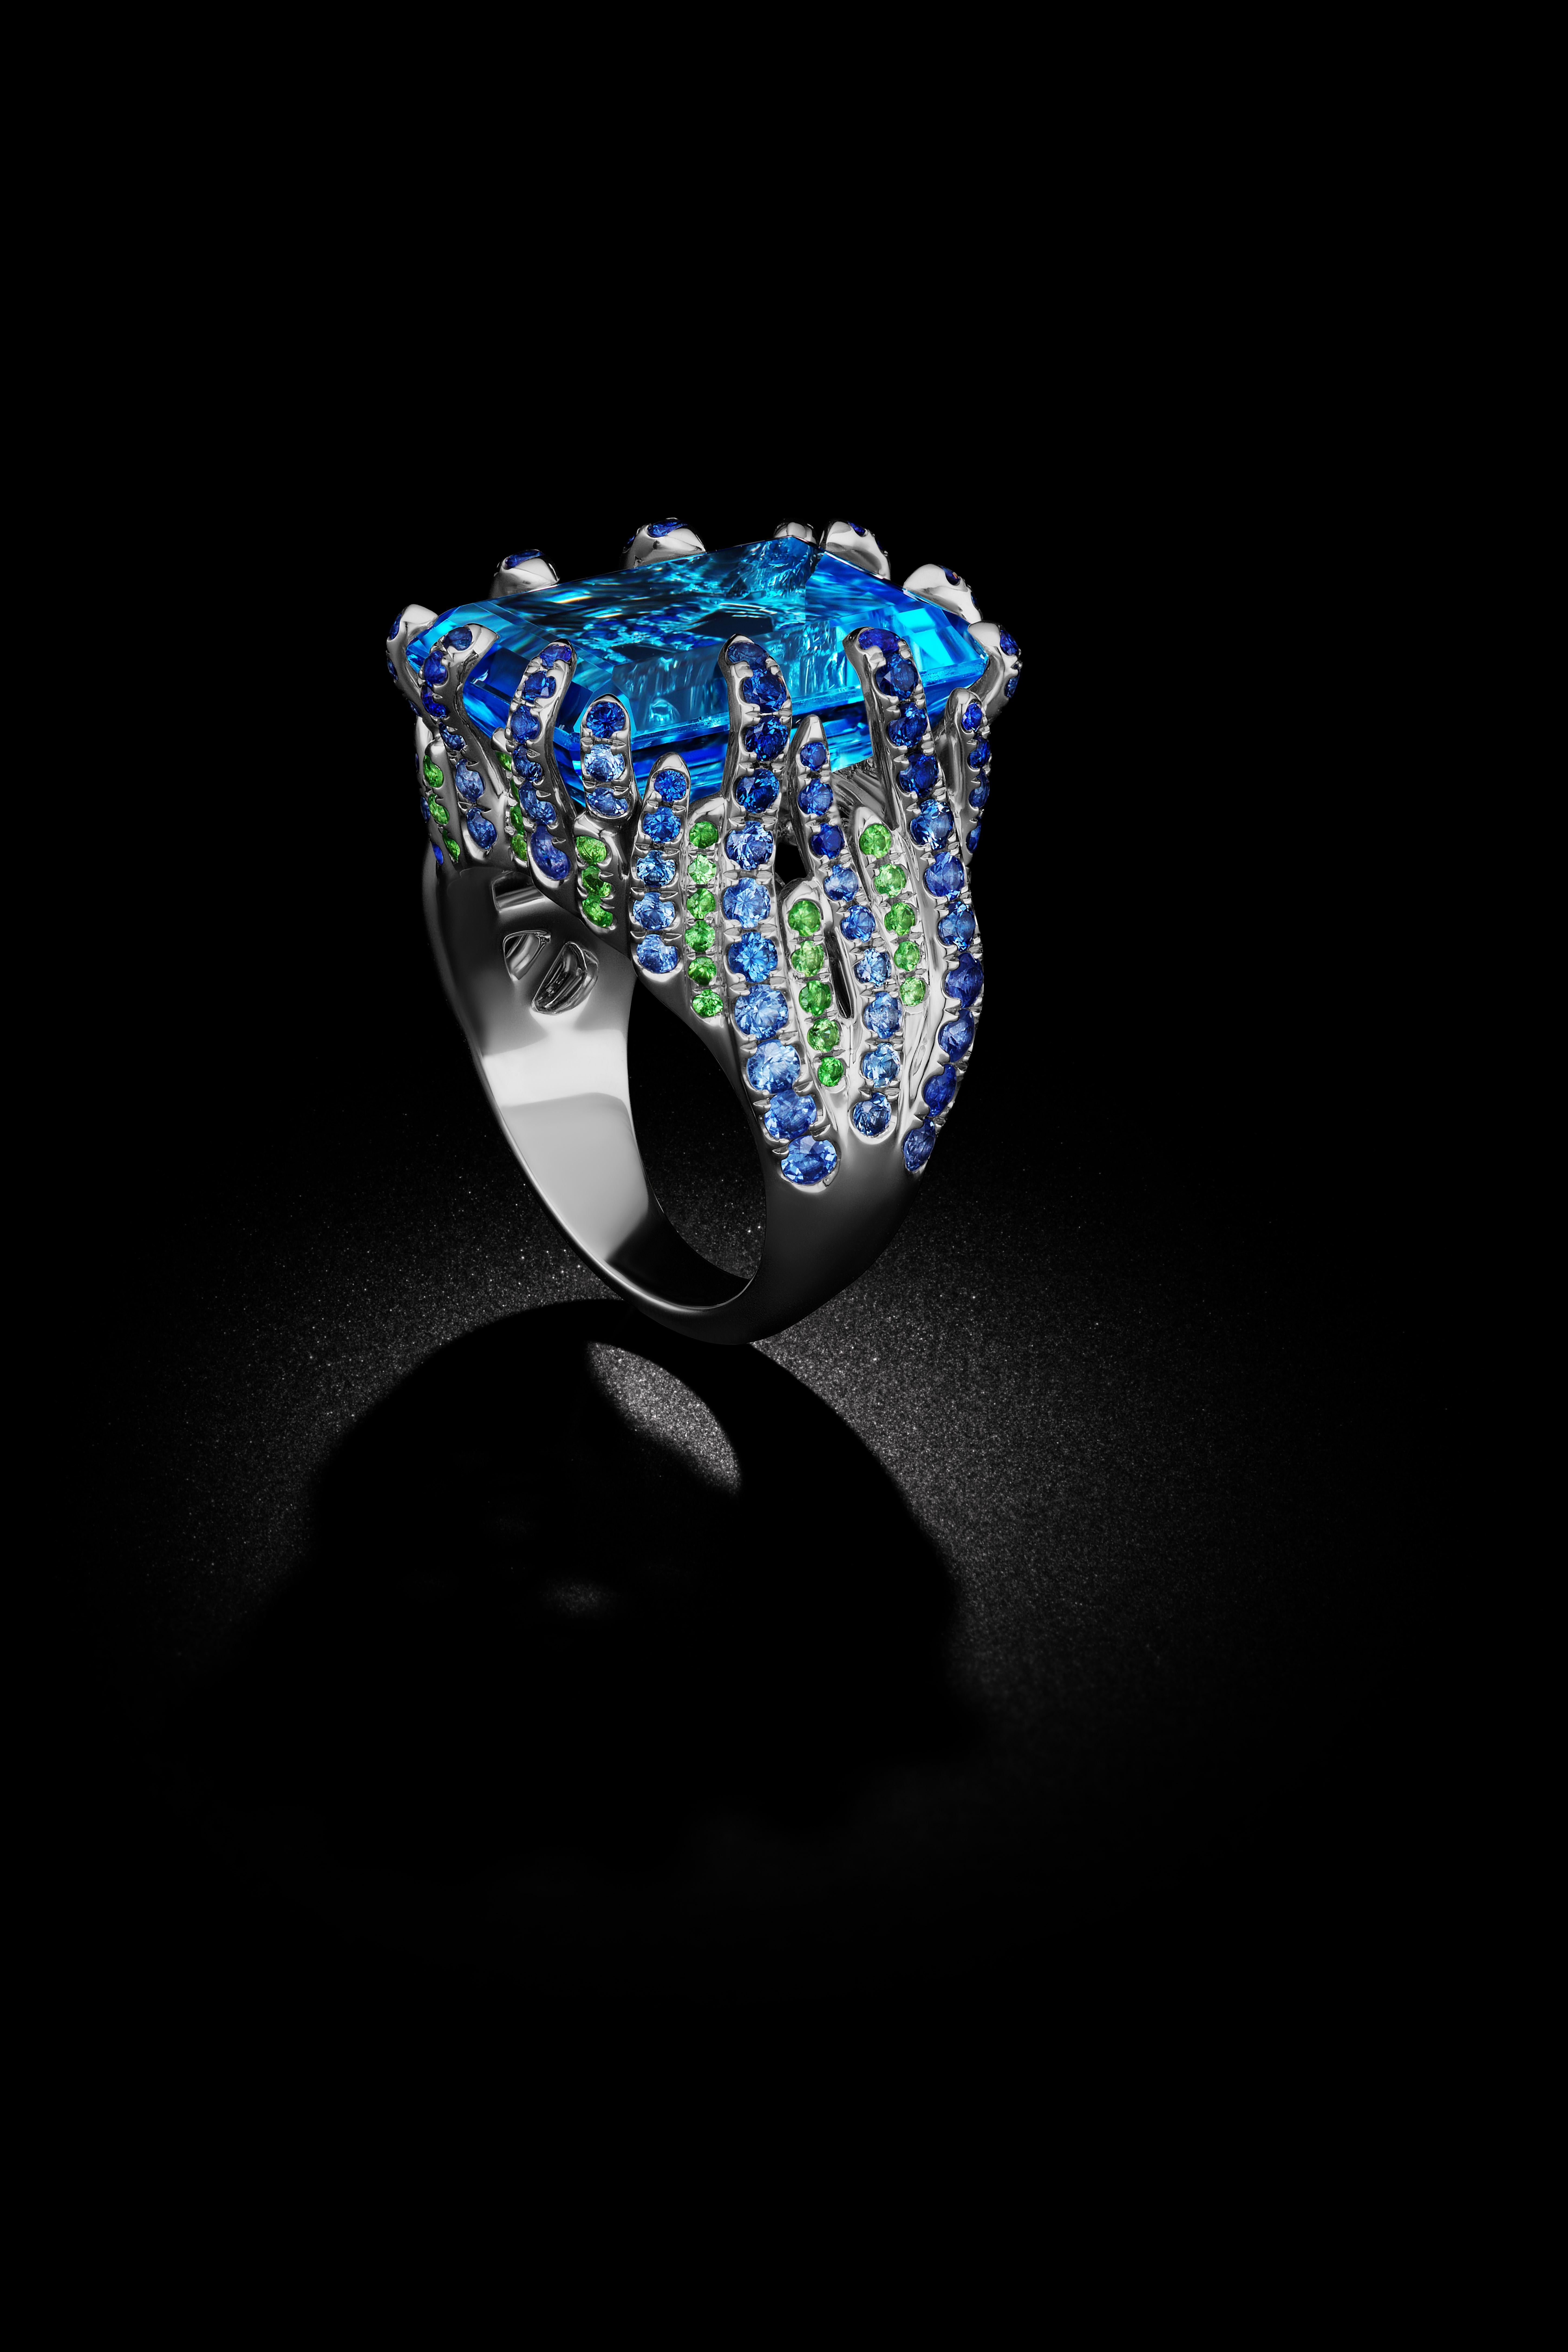 The center of the Blue Topaz  gemstone bears a resemblance to the deep blue water of the sea. A look at the ring's side view are pave of Tsavorites (Green Garnets) and dark Sapphires creating the the illusion of waving fronds in the sea. This